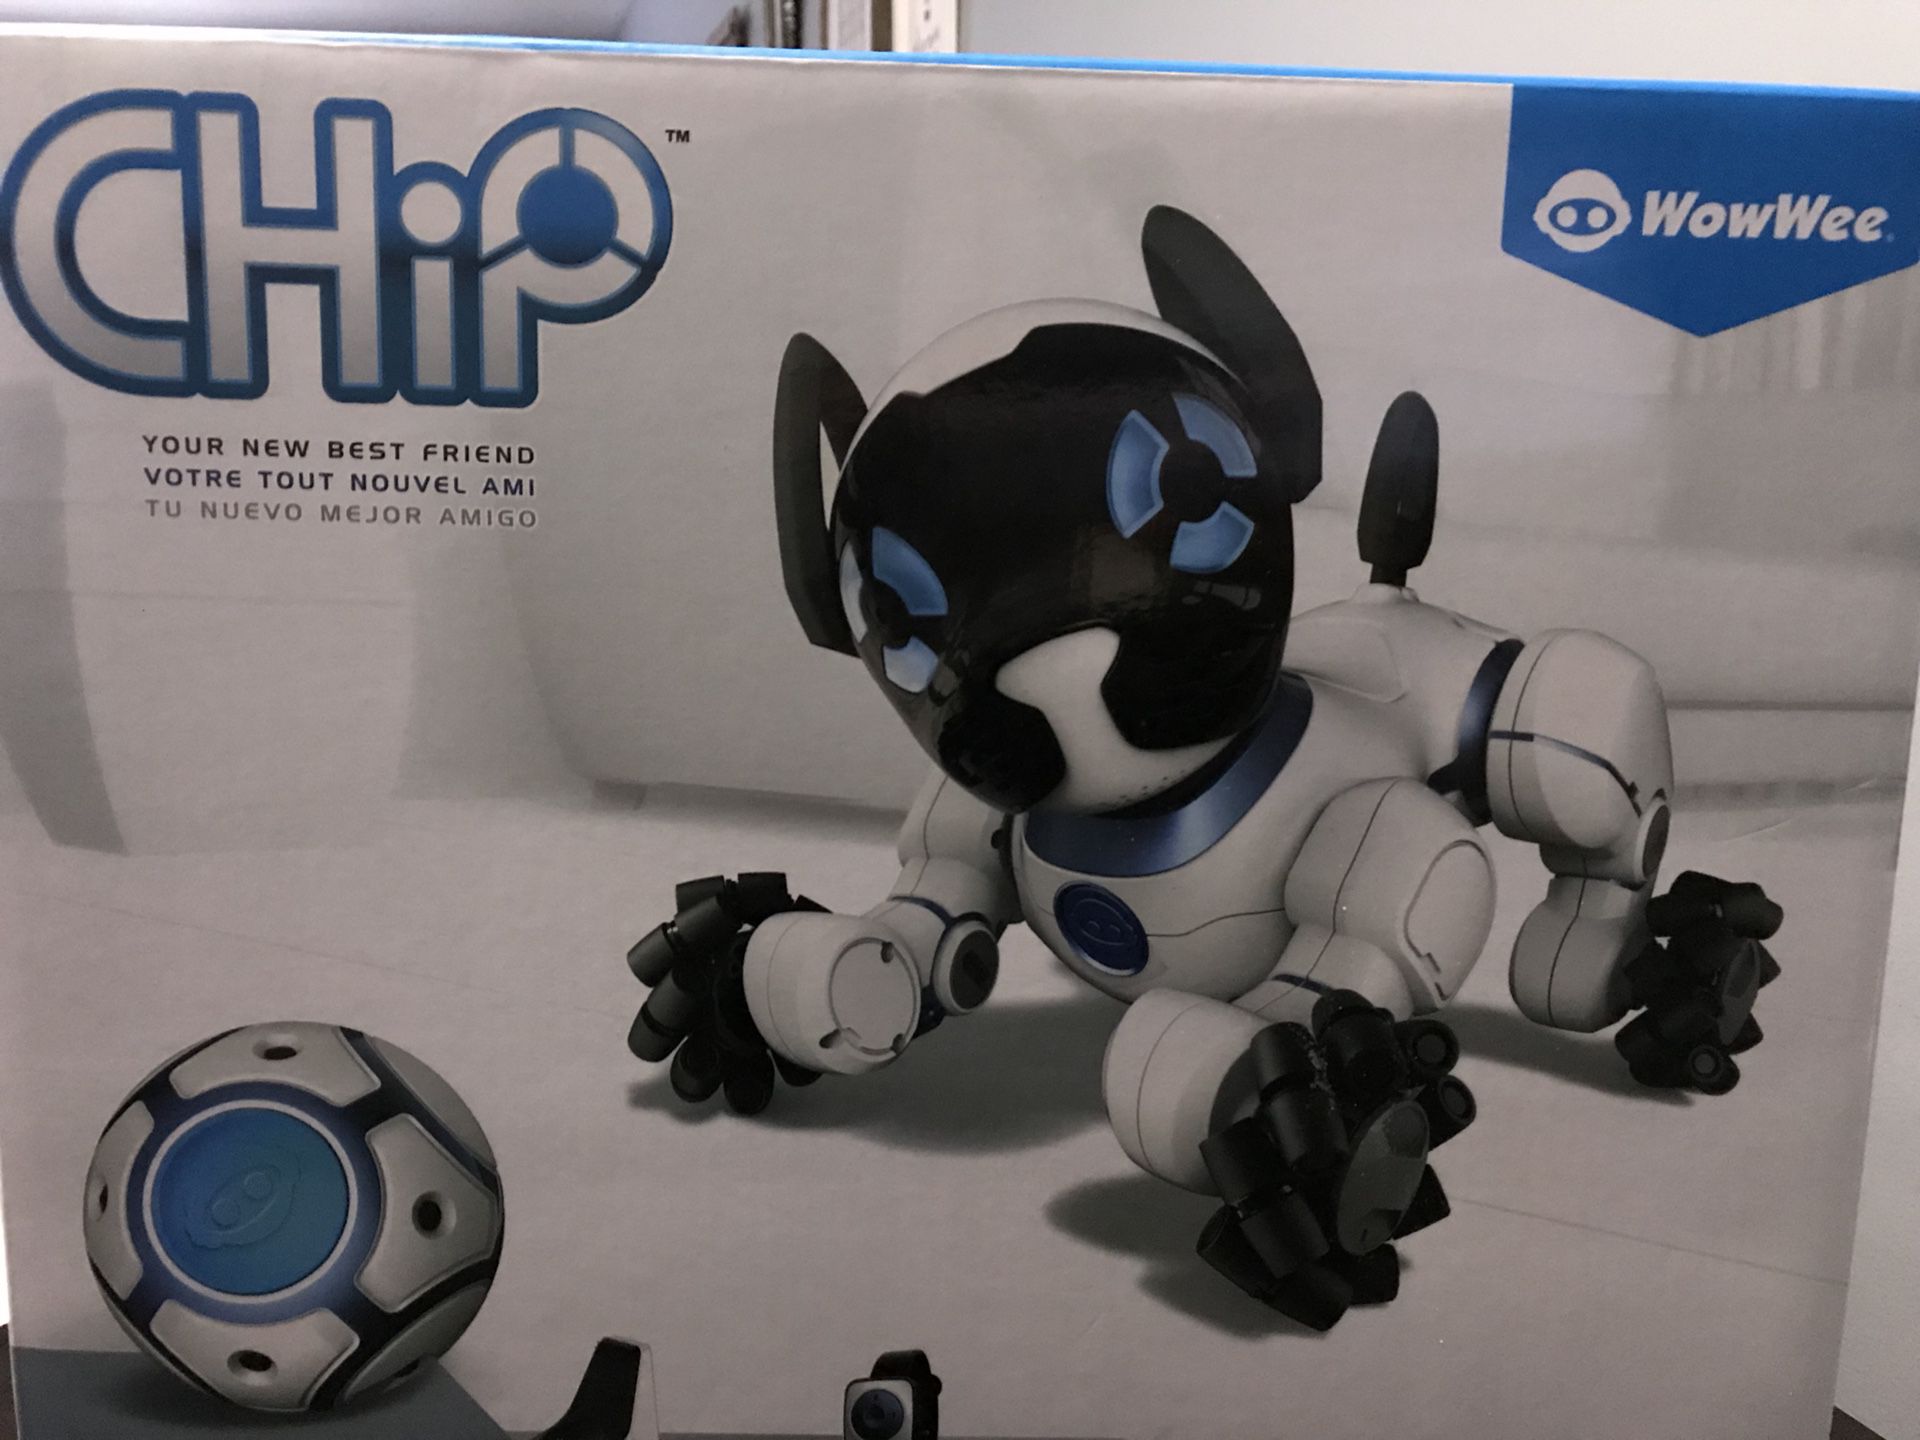 WowWee chip robot dog for in Elmhurst, IL OfferUp